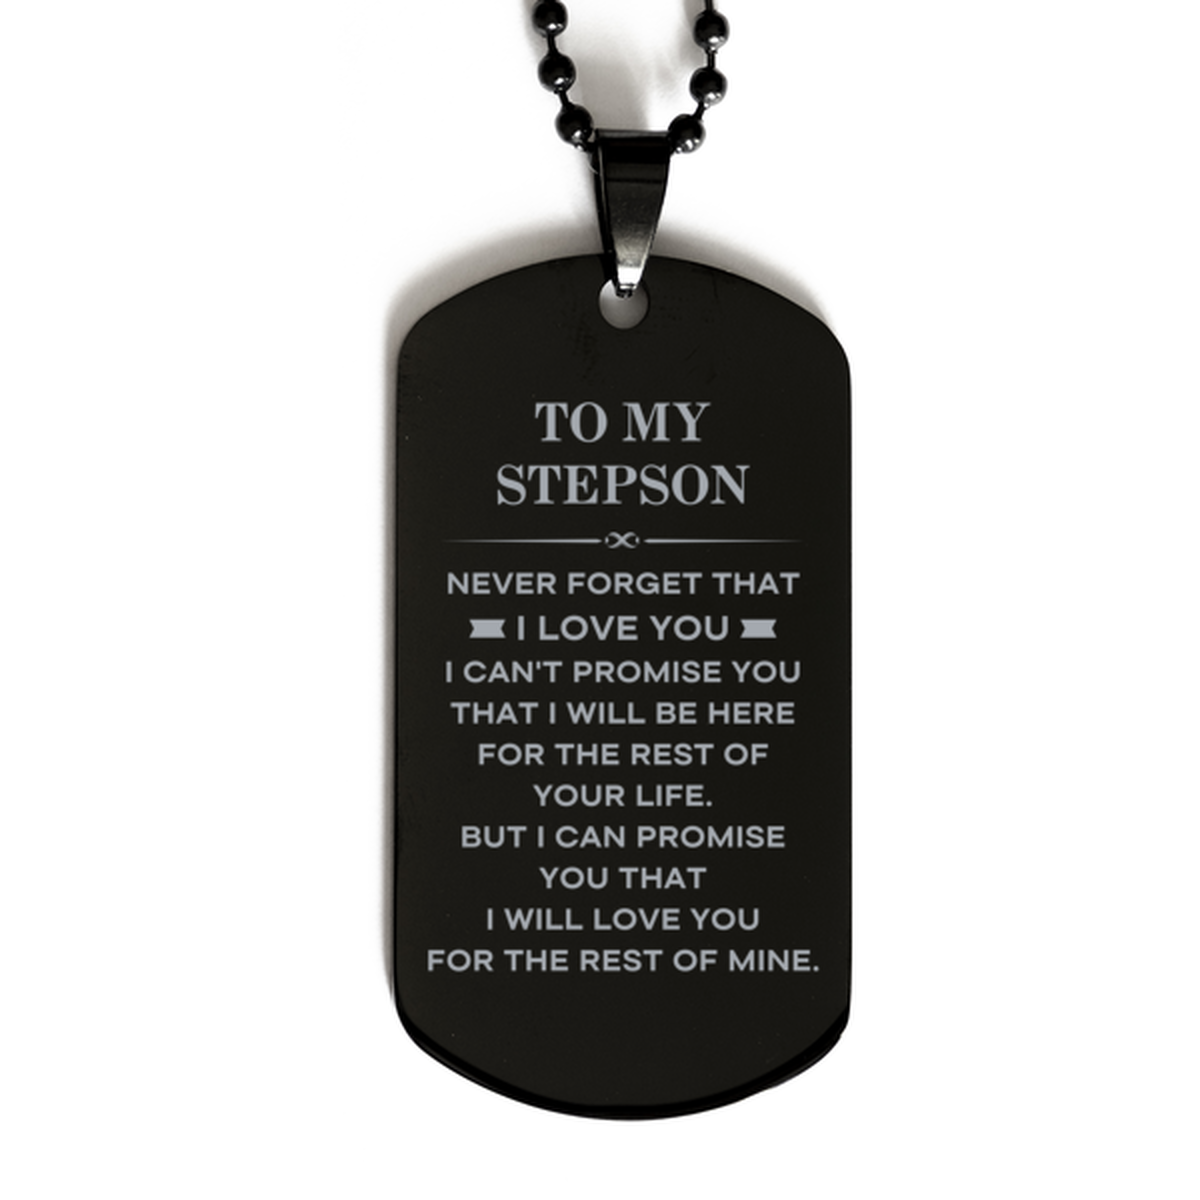 To My Stepson Gifts, I will love you for the rest of mine, Love Stepson Dog Tag Necklace, Birthday Christmas Unique Black Dog Tag For Stepson